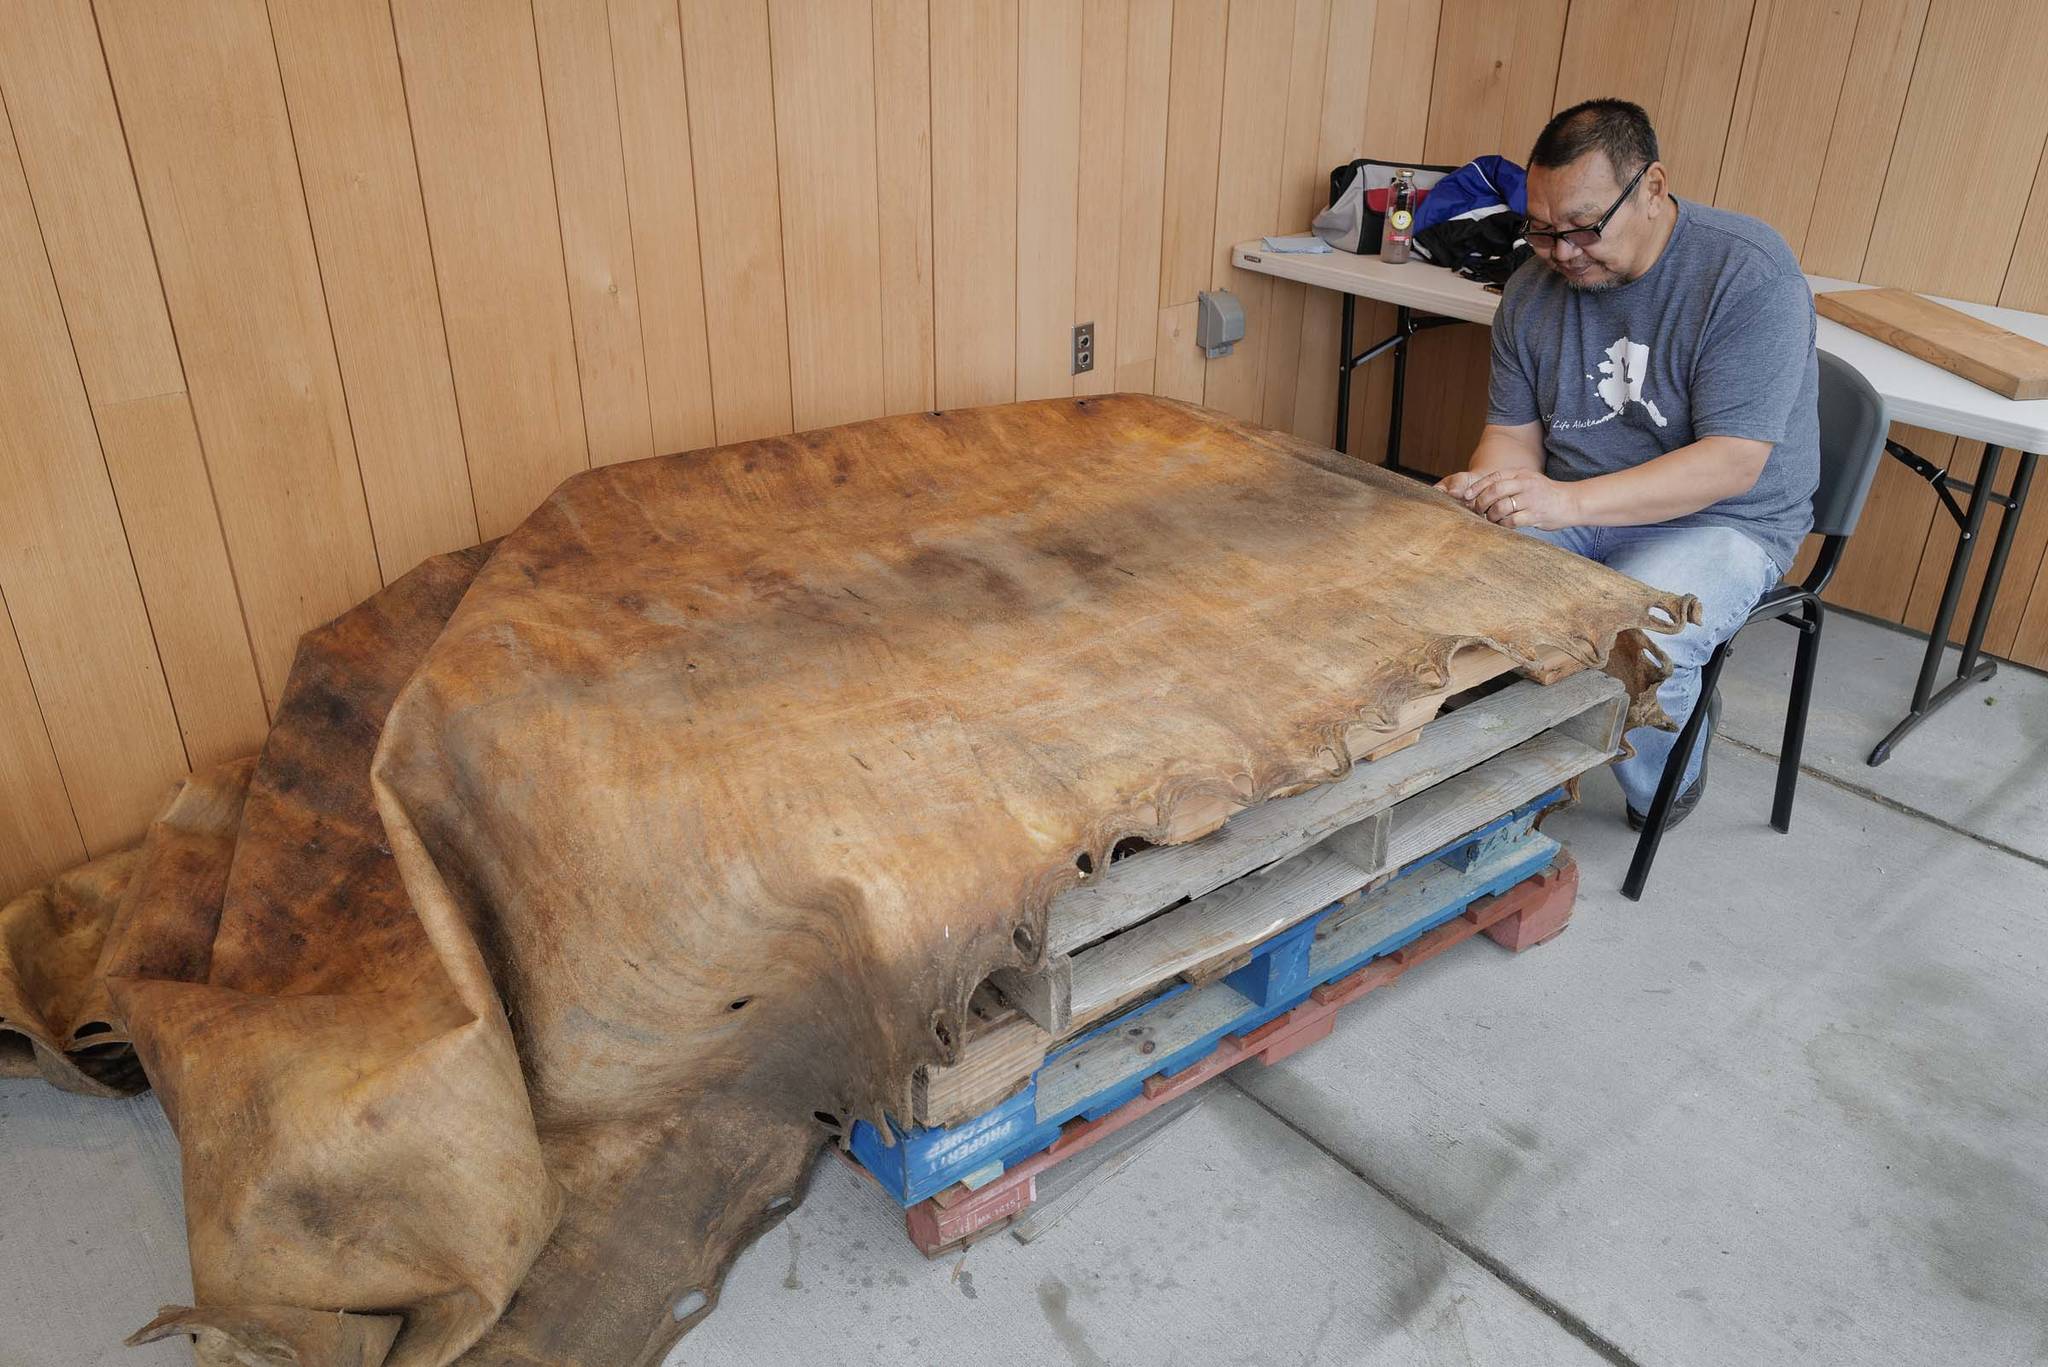 John Waghiyi Jr., artist and whaling captain, sews a walrus hide together at the Walter Soboleff Center on Tuesday, Aug. 27, 2019. The hide will be used for a blanket toss by the Sealaska Heritage Institute. Waghiyi and his wife, Arlene Annogiyuk Waghiyi, from Savoonga, are currently the artists-in-residence at SHI. the Waghiyis will demonstrate dances from their region from noon-1 pm, Wednesday, Aug. 28, for the public at SHI. (Michael Penn | Juneau Empire)